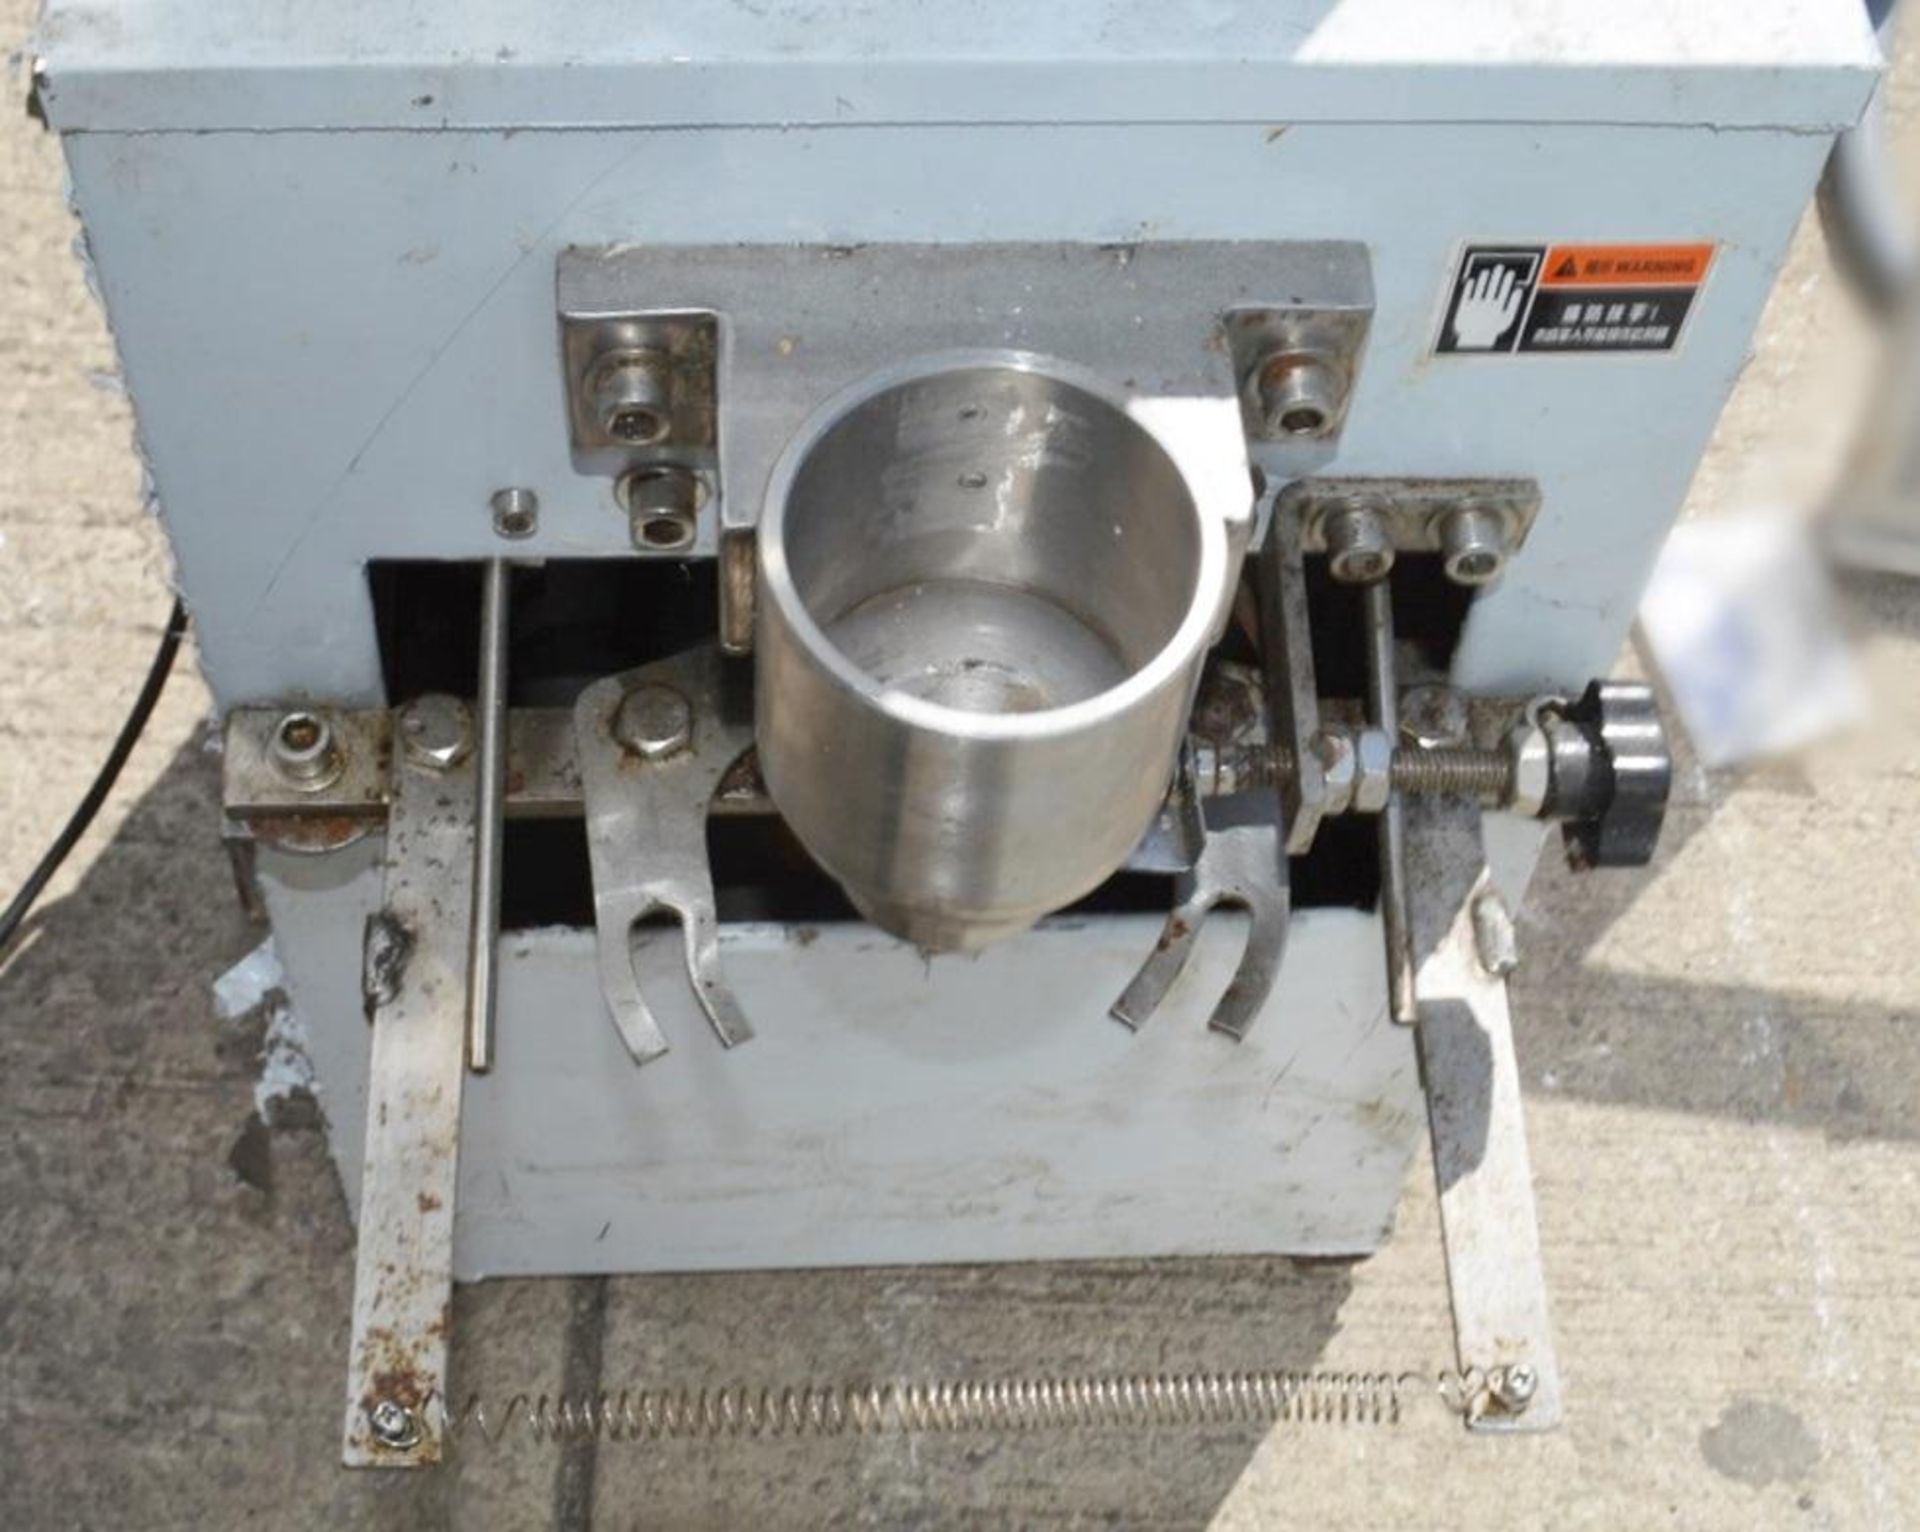 1 x Industrial Meatball Machine (Model: SXW-280) - Dimensions: H123 x W27 x D57cmPre-owned, Taken Fr - Image 3 of 5